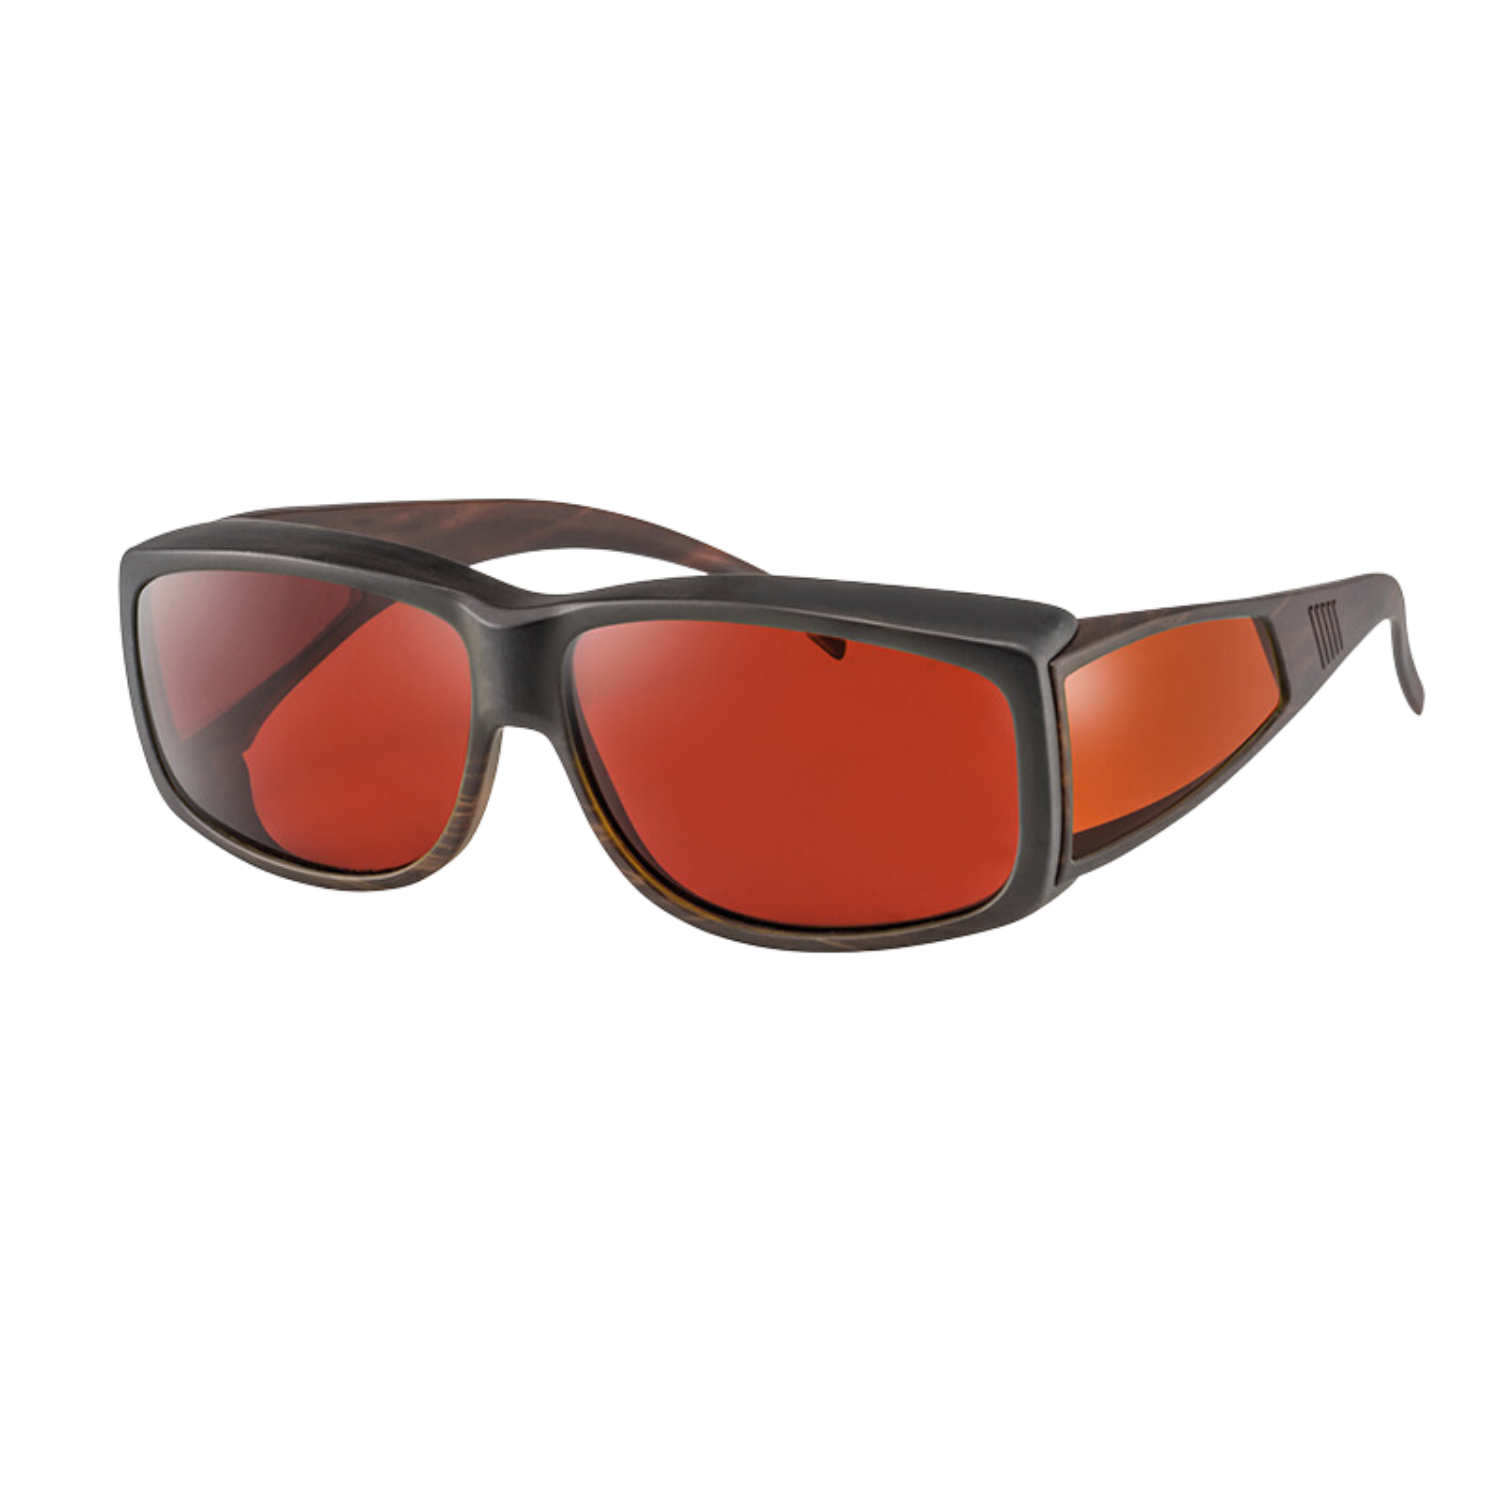 Image of the Polaruzed Red Tint Asensys XL Blue Light Blocking Glasses from Eschenbach.